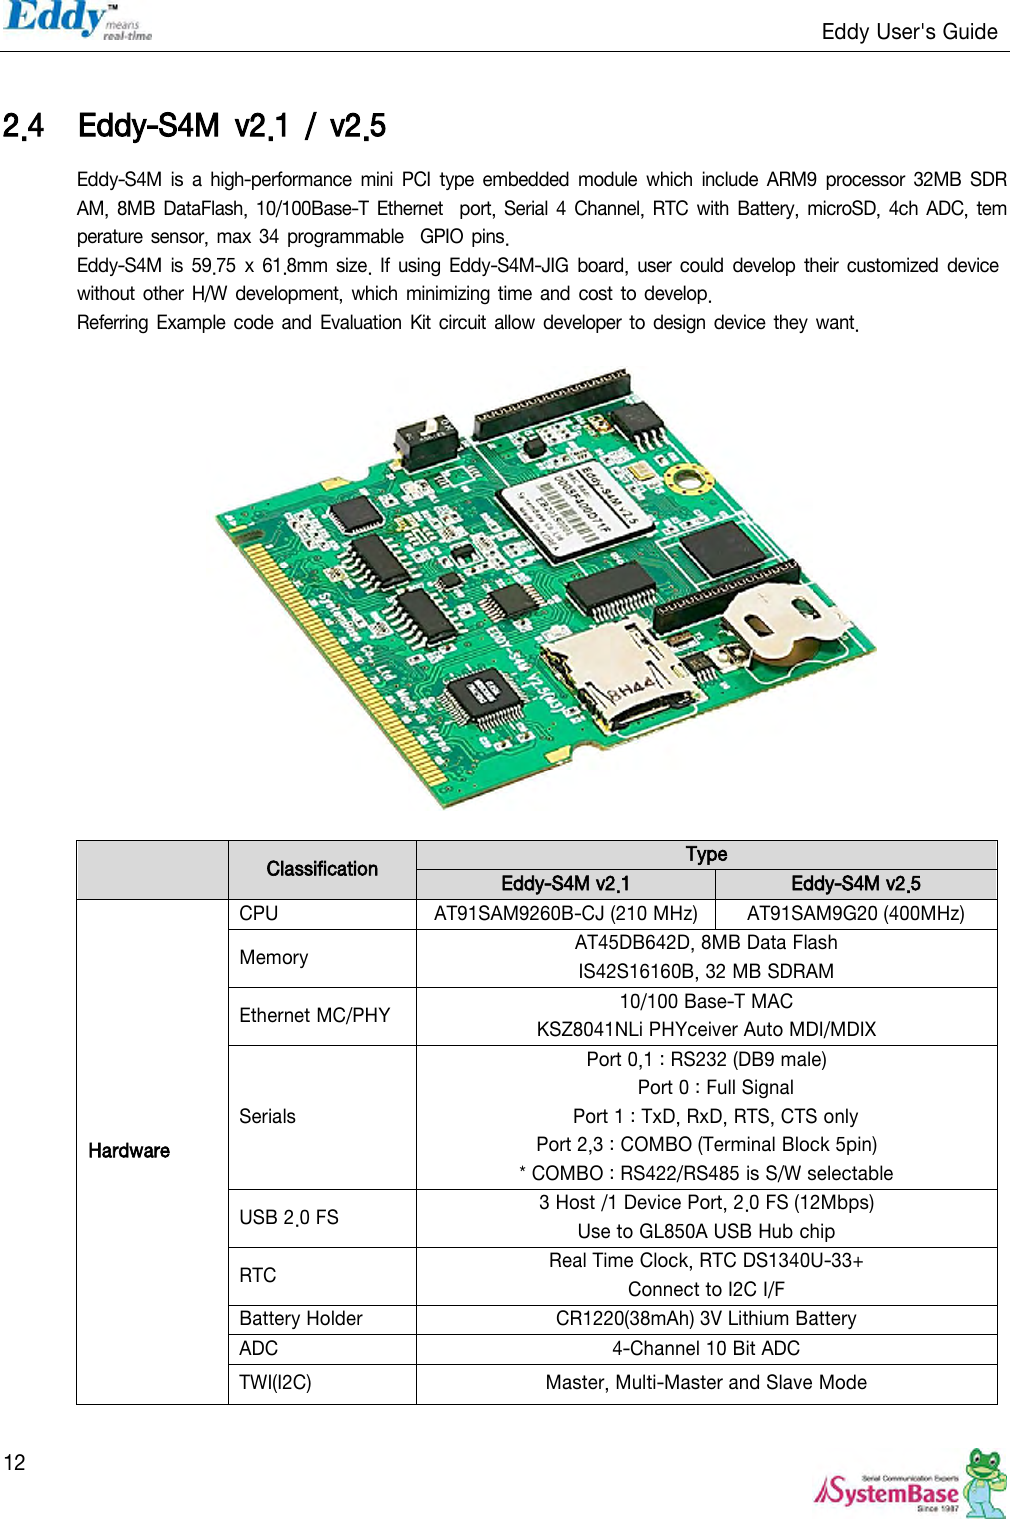                                                                   Eddy User&apos;s Guide   12  2.4 Eddy-S4M  v2.1  /  v2.5 Eddy-S4M is  a  high-performance  mini  PCI  type  embedded  module  which  include  ARM9  processor  32MB SDRAM, 8MB DataFlash, 10/100Base-T Ethernet  port,  Serial 4  Channel,  RTC with Battery,  microSD, 4ch ADC,  temperature  sensor, max 34  programmable  GPIO pins.  Eddy-S4M  is 59.75  x  61.8mm size.  If  using  Eddy-S4M-JIG board, user  could  develop  their  customized device without other  H/W  development, which  minimizing  time  and cost  to develop.  Referring Example code  and Evaluation Kit circuit allow developer to  design device they  want.     Classification Type Eddy-S4M v2.1 Eddy-S4M v2.5 Hardware CPU AT91SAM9260B-CJ (210 MHz) AT91SAM9G20 (400MHz) Memory AT45DB642D, 8MB Data Flash IS42S16160B, 32 MB SDRAM Ethernet MC/PHY 10/100 Base-T MAC KSZ8041NLi PHYceiver Auto MDI/MDIX Serials Port 0,1 : RS232 (DB9 male) Port 0 : Full Signal Port 1 : TxD, RxD, RTS, CTS only Port 2,3 : COMBO (Terminal Block 5pin) * COMBO : RS422/RS485 is S/W selectable USB 2.0 FS 3 Host /1 Device Port, 2.0 FS (12Mbps) Use to GL850A USB Hub chip RTC Real Time Clock, RTC DS1340U-33+ Connect to I2C I/F Battery Holder CR1220(38mAh) 3V Lithium Battery ADC   4-Channel 10 Bit ADC TWI(I2C) Master, Multi-Master and Slave Mode 